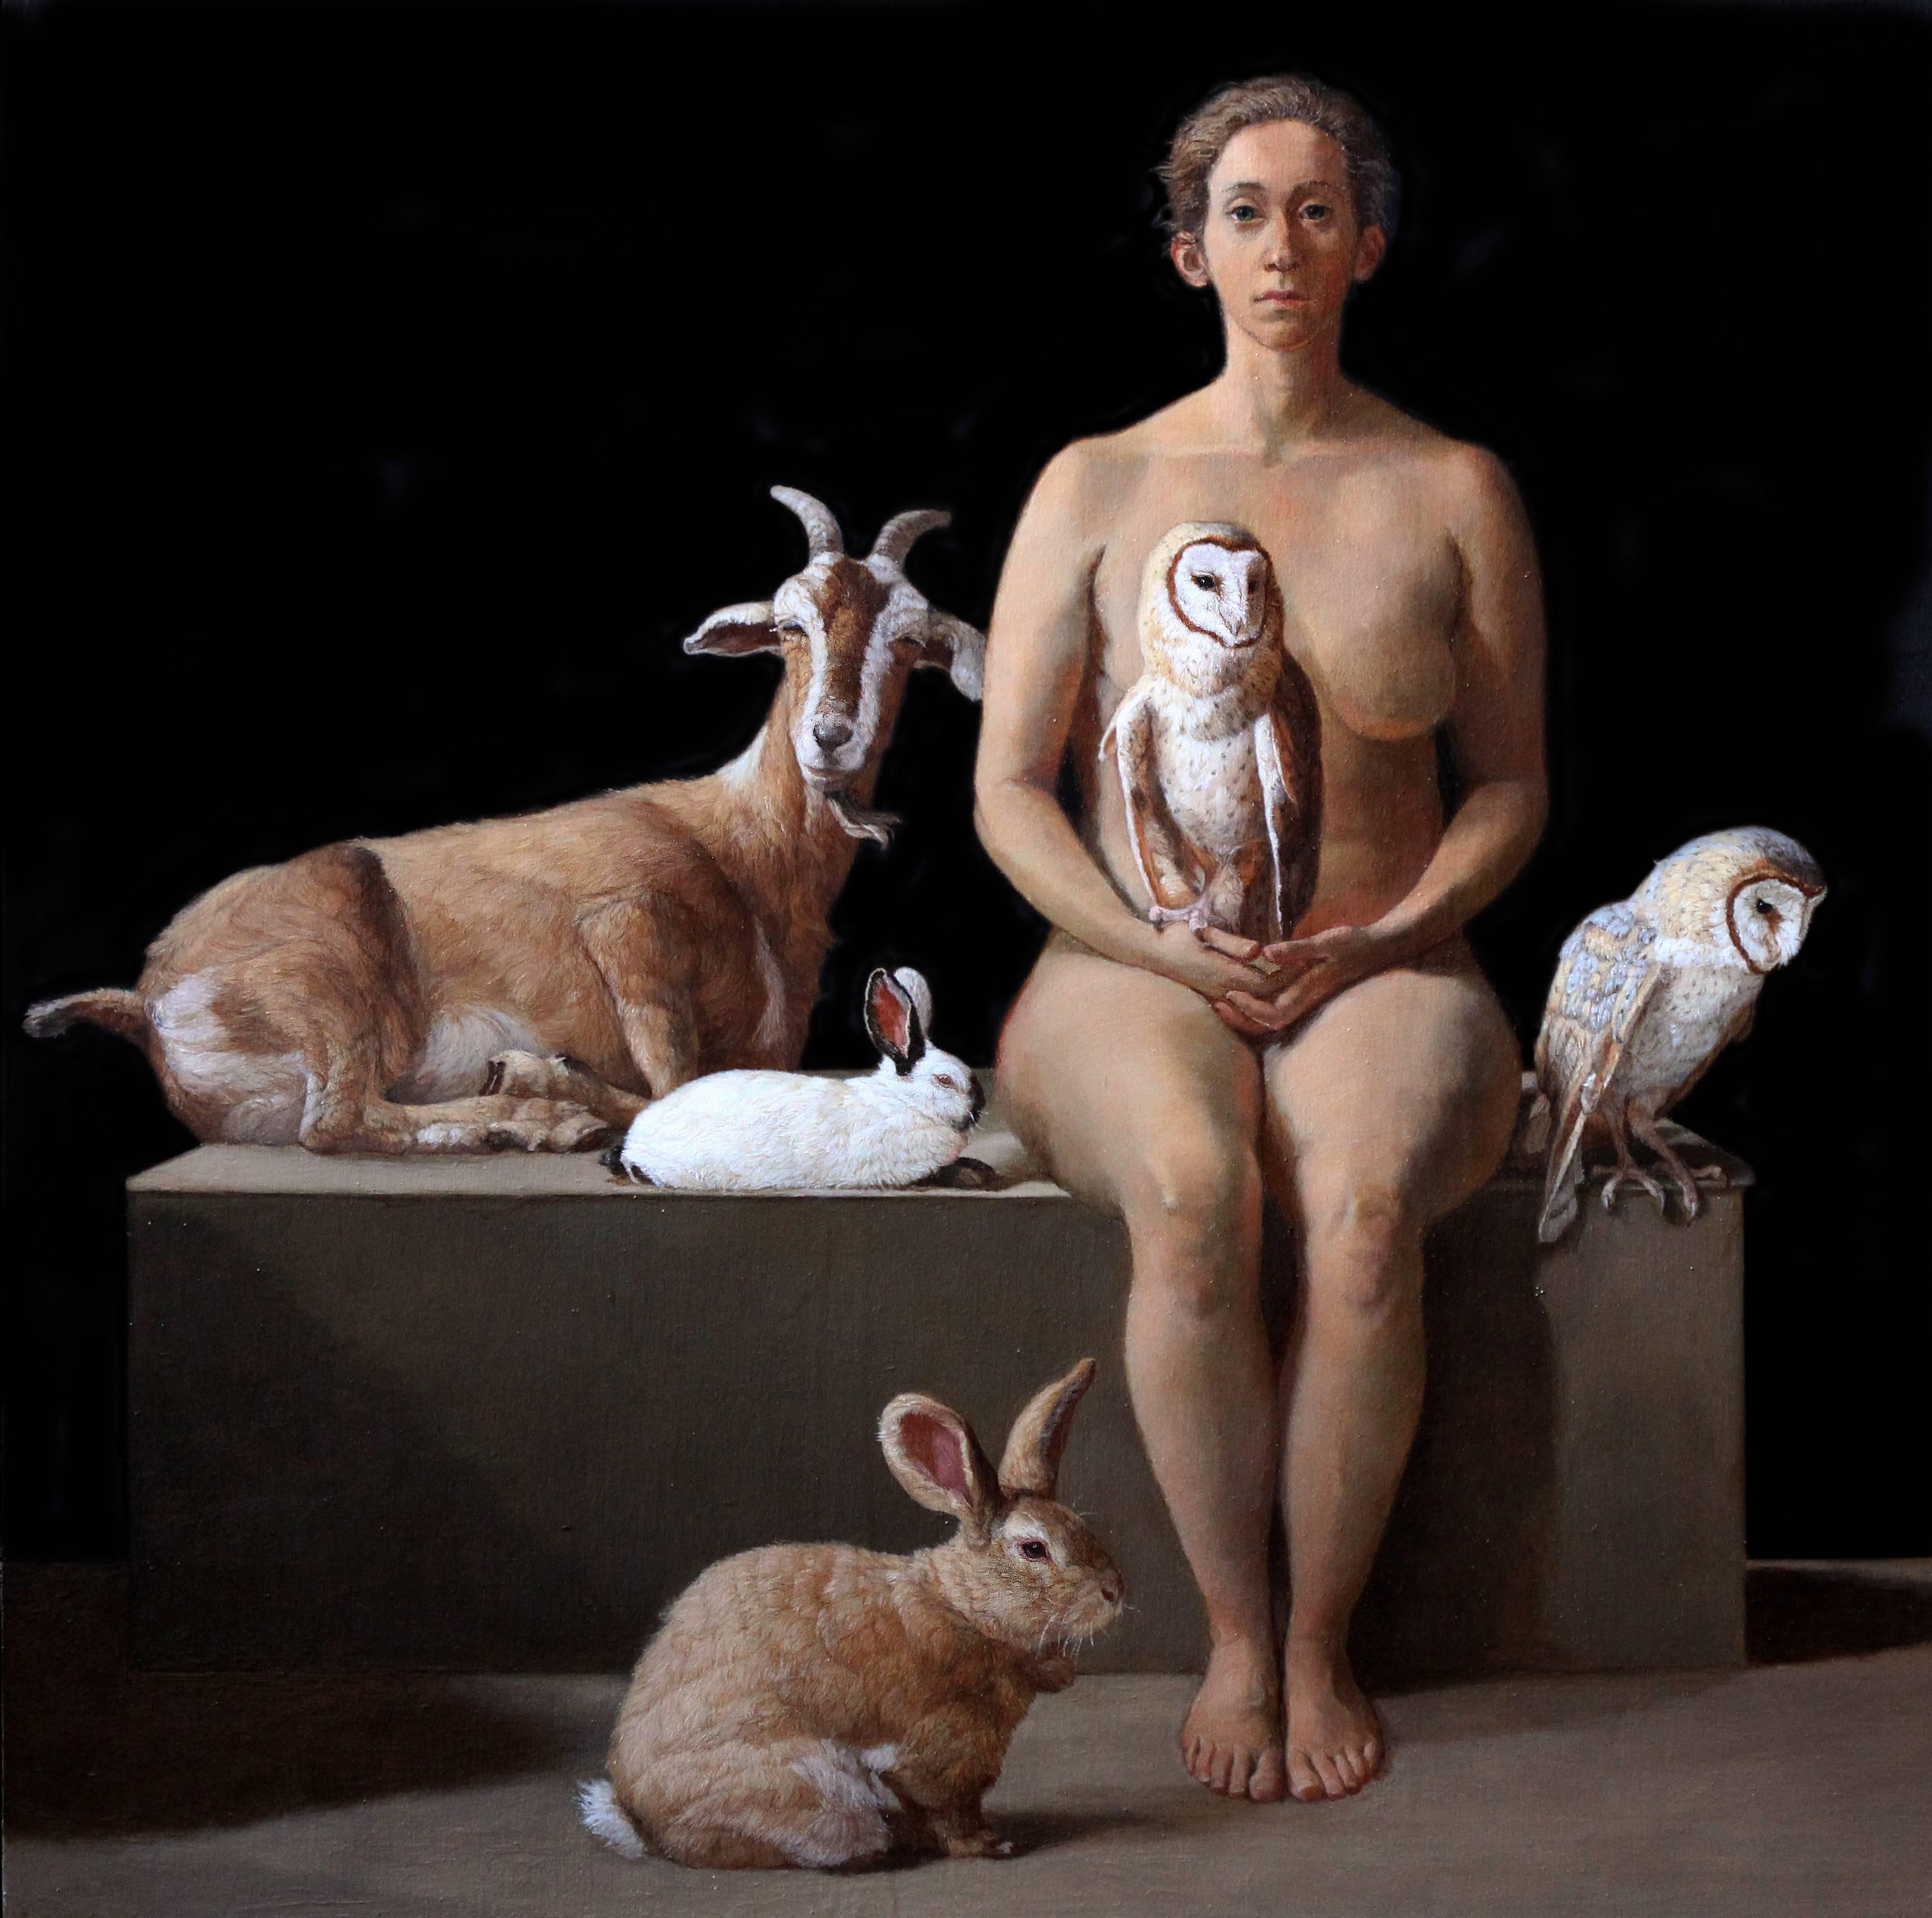 RESCUER WITH OWLS, RABBITS, AND A FERAL GOAT, hyper-realistic, still-life